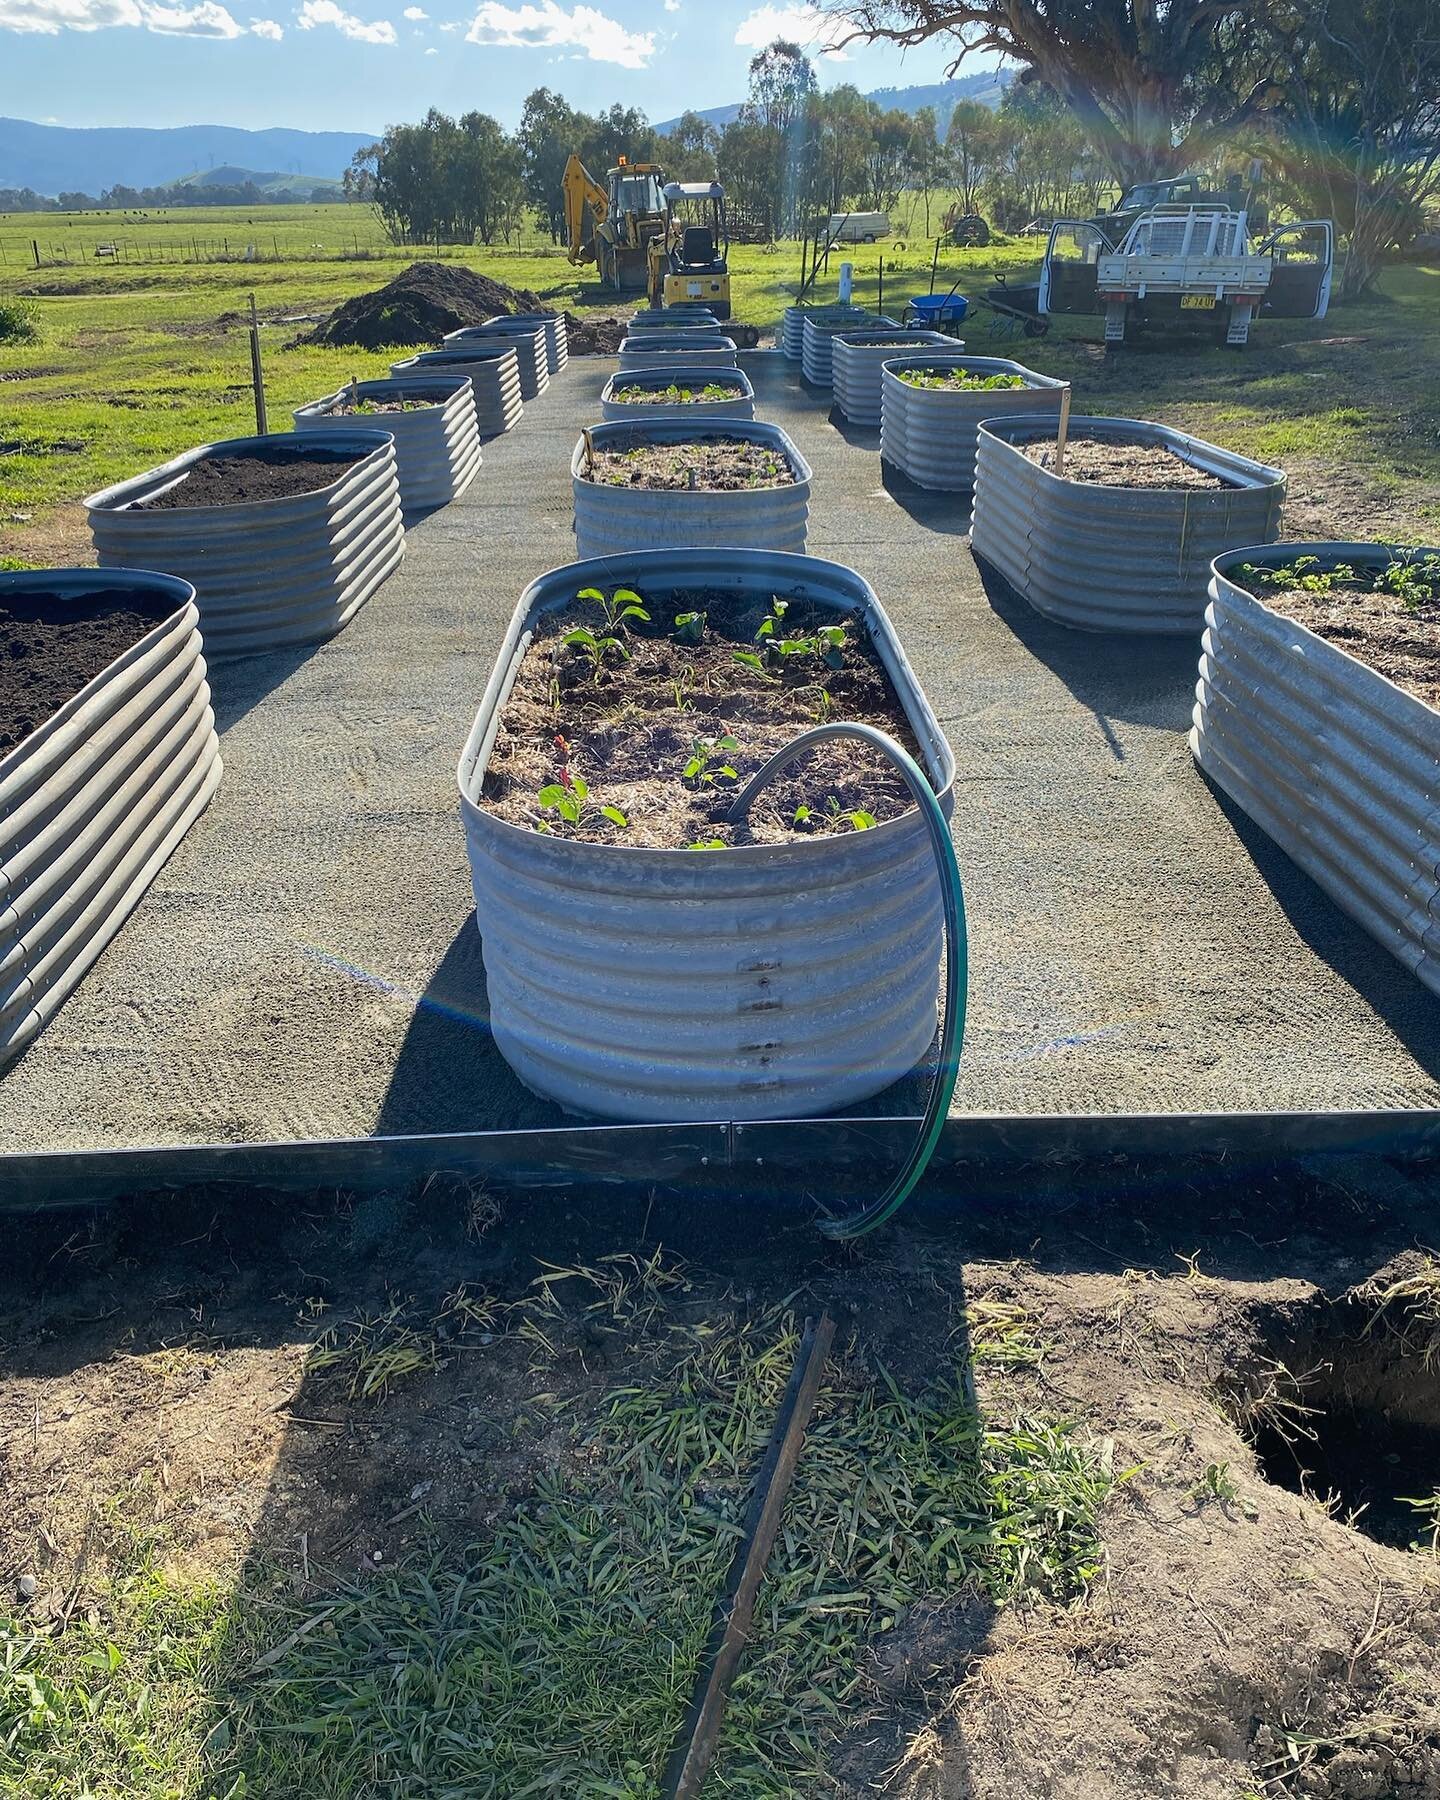 The finishing touches on the garden bed area is DONE!

Steel edging is on and the crusher dust is compact down for a beautiful looking finish!

It&rsquo;s a big job out here and we are excited to share more about what we can do to get you growing you